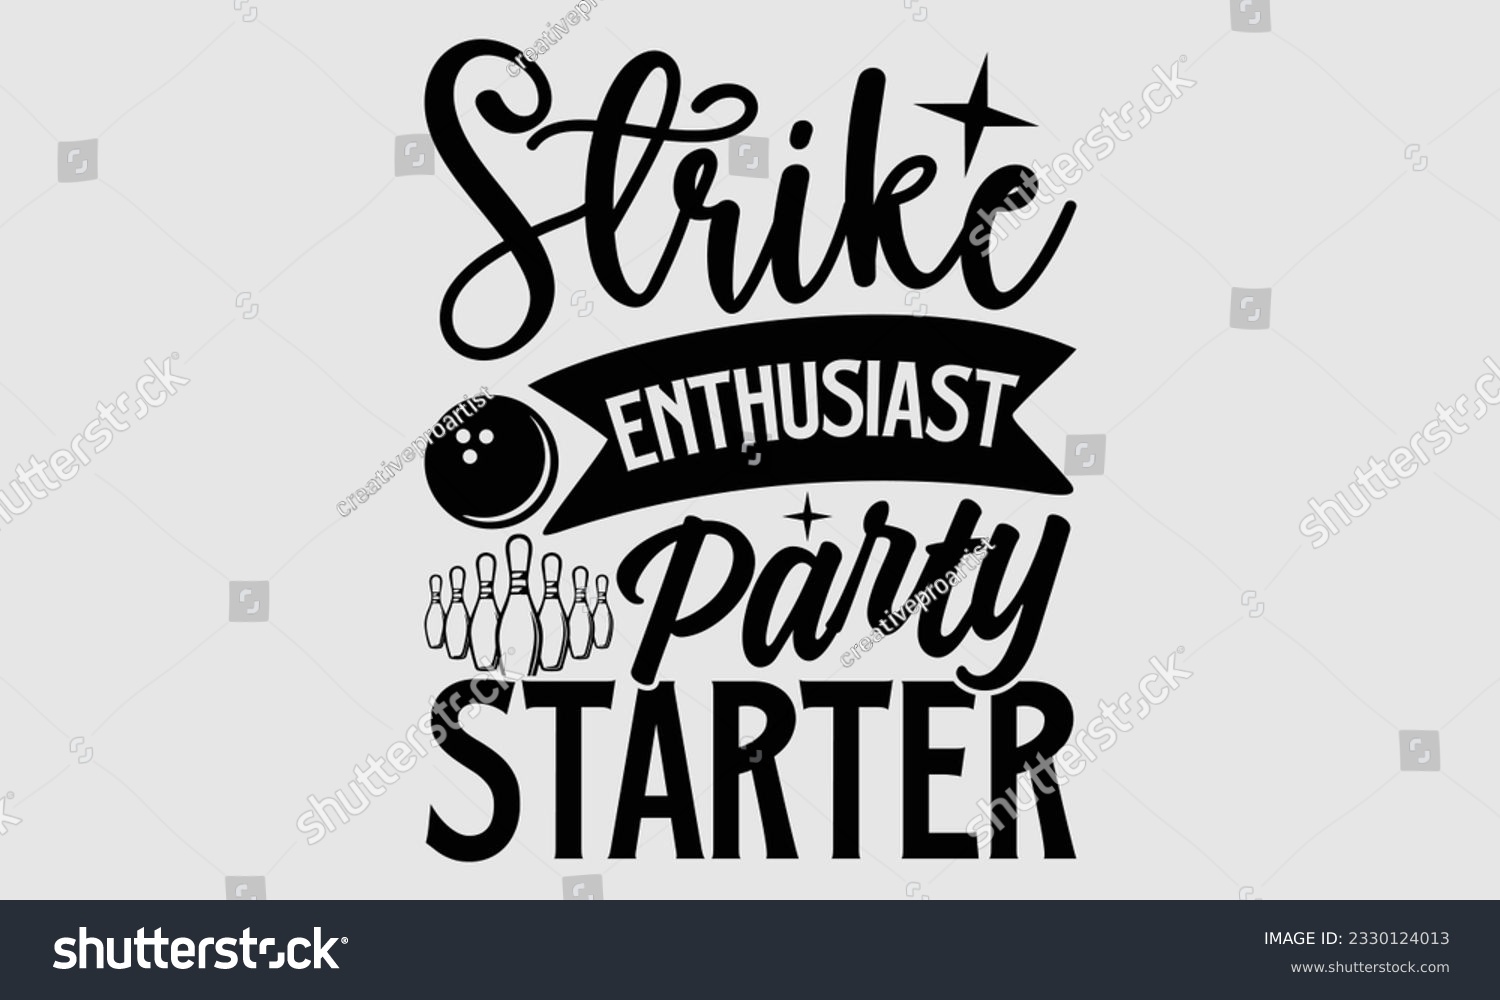 SVG of Strike Enthusiast Party Starter- Bowling t-shirt design, Illustration for prints on SVG and bags, posters, cards, greeting card template with typography text EPS svg